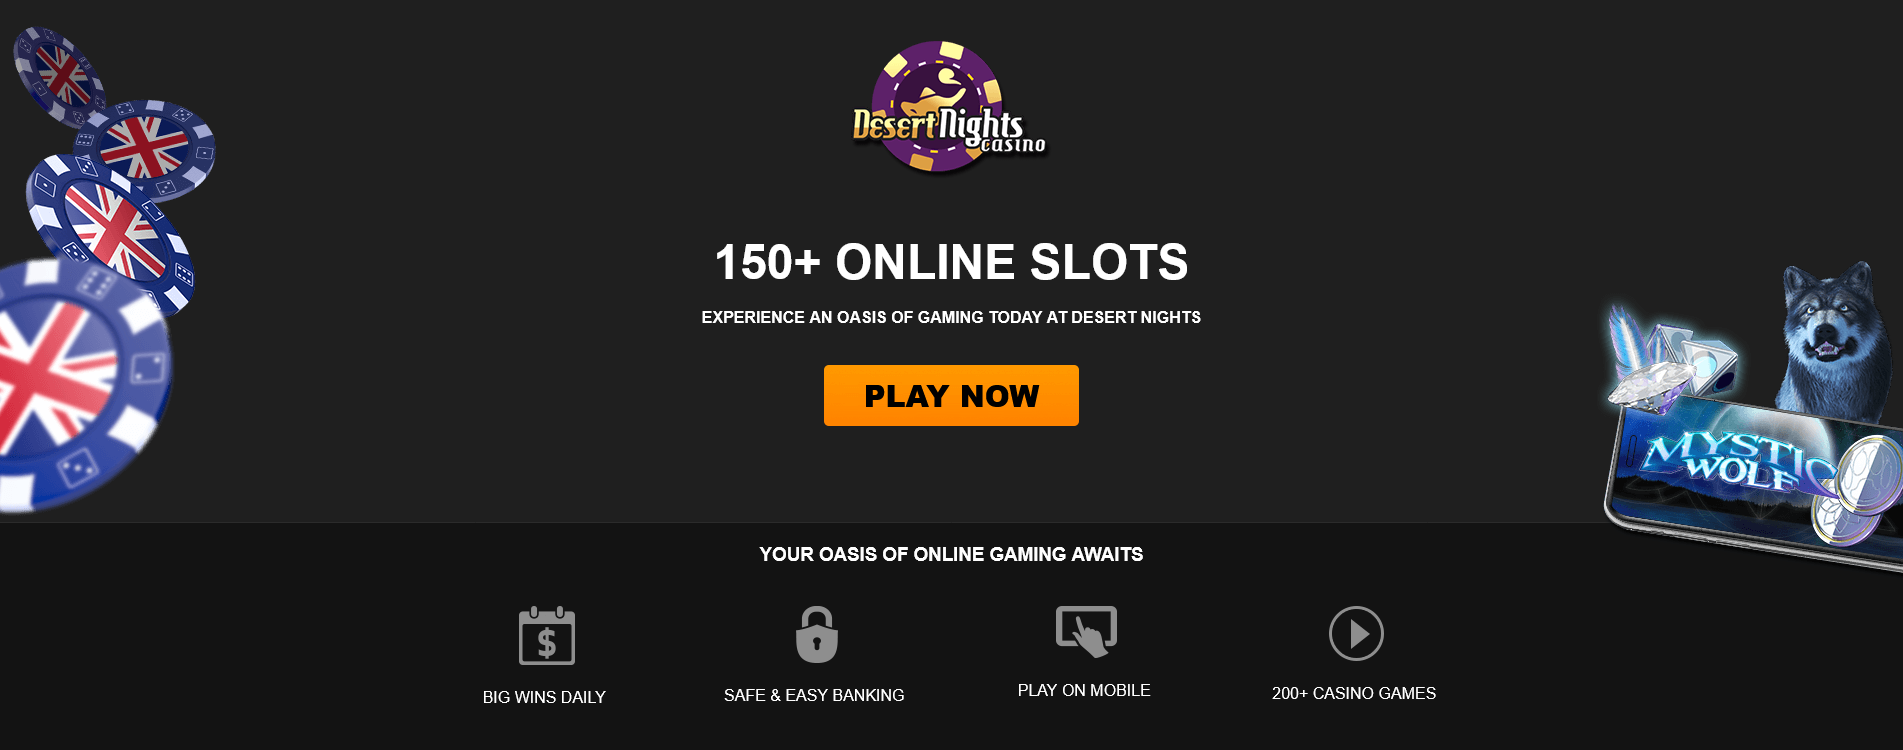 150+ ONLINE SLOTS EXPERIENCE AN OASIS OF GAMING TODAY AT DESERT NIGHTS